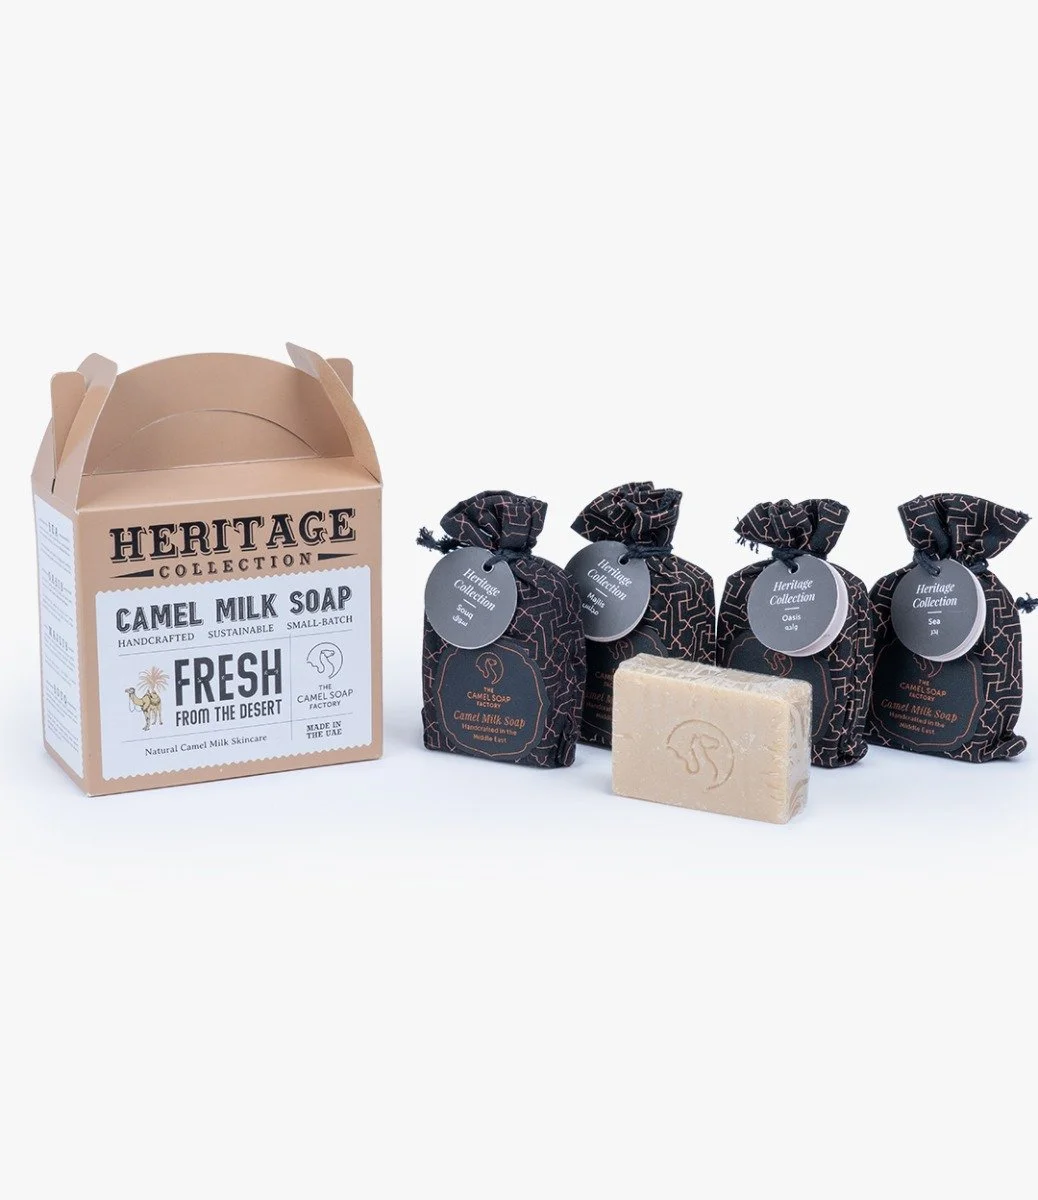 Heritage Camel Milk Soap Collection by The Camel Soap Factory